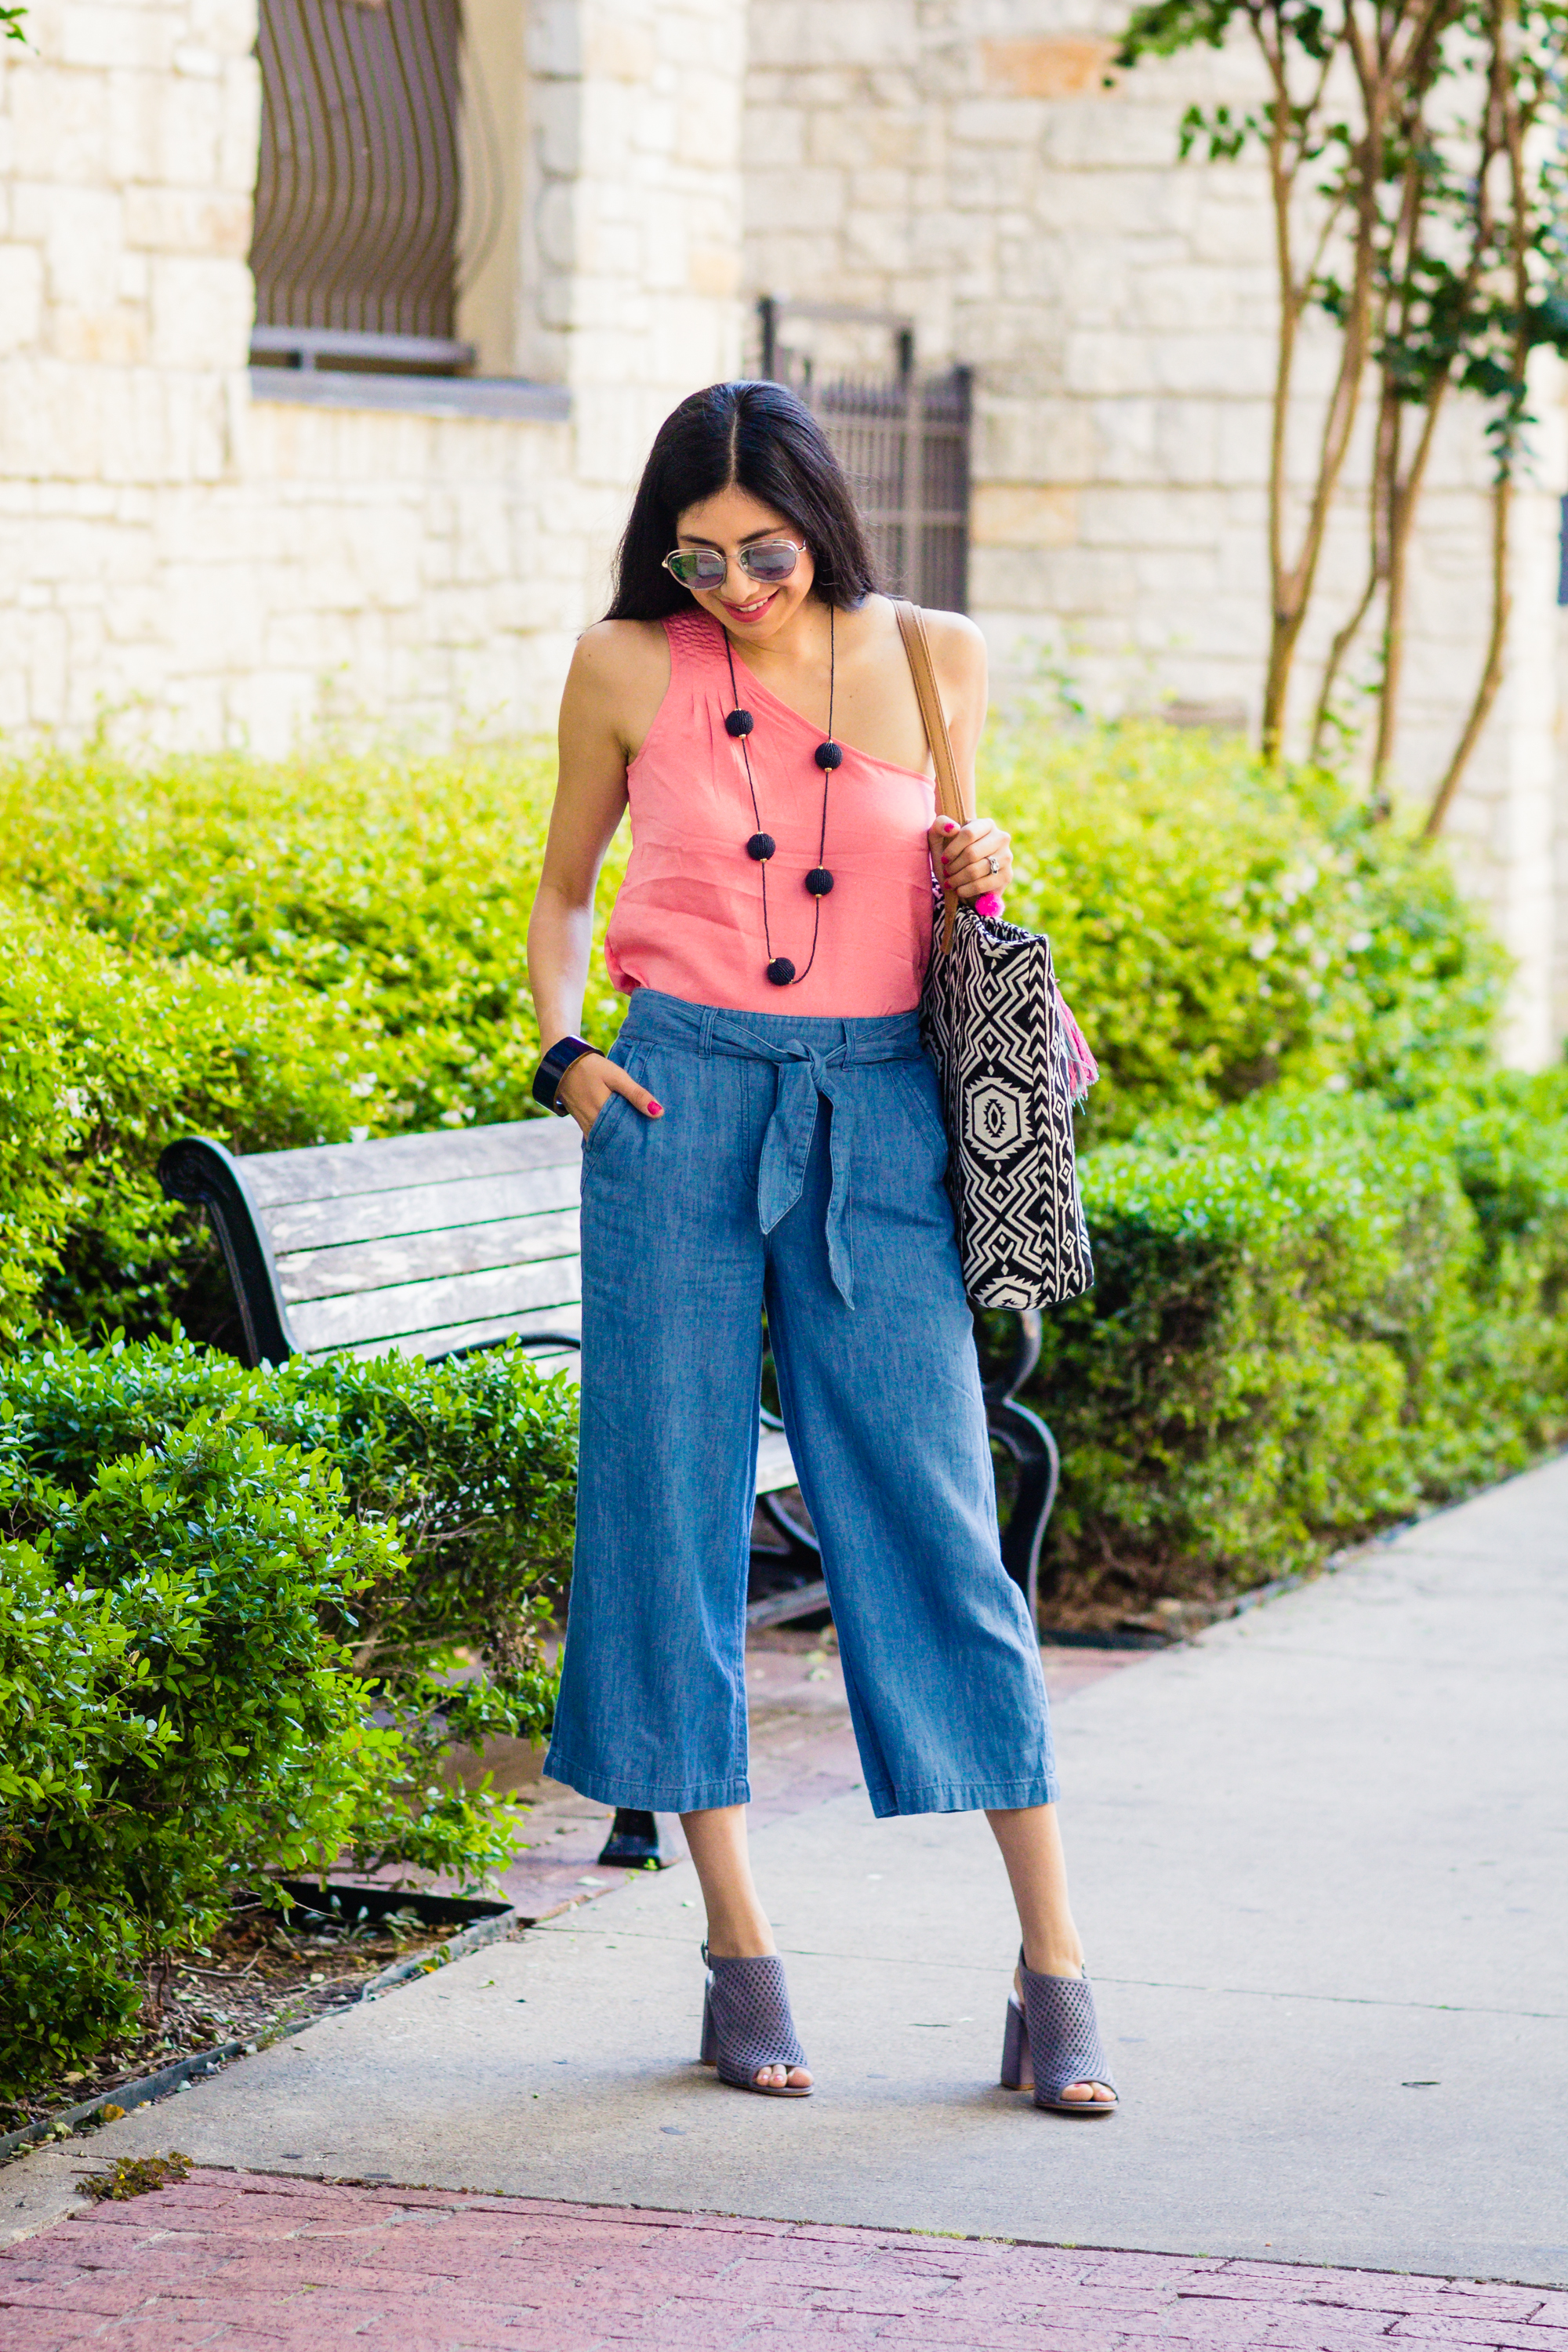 What are Culottes and how to wear them? — Vanessa in Dallas